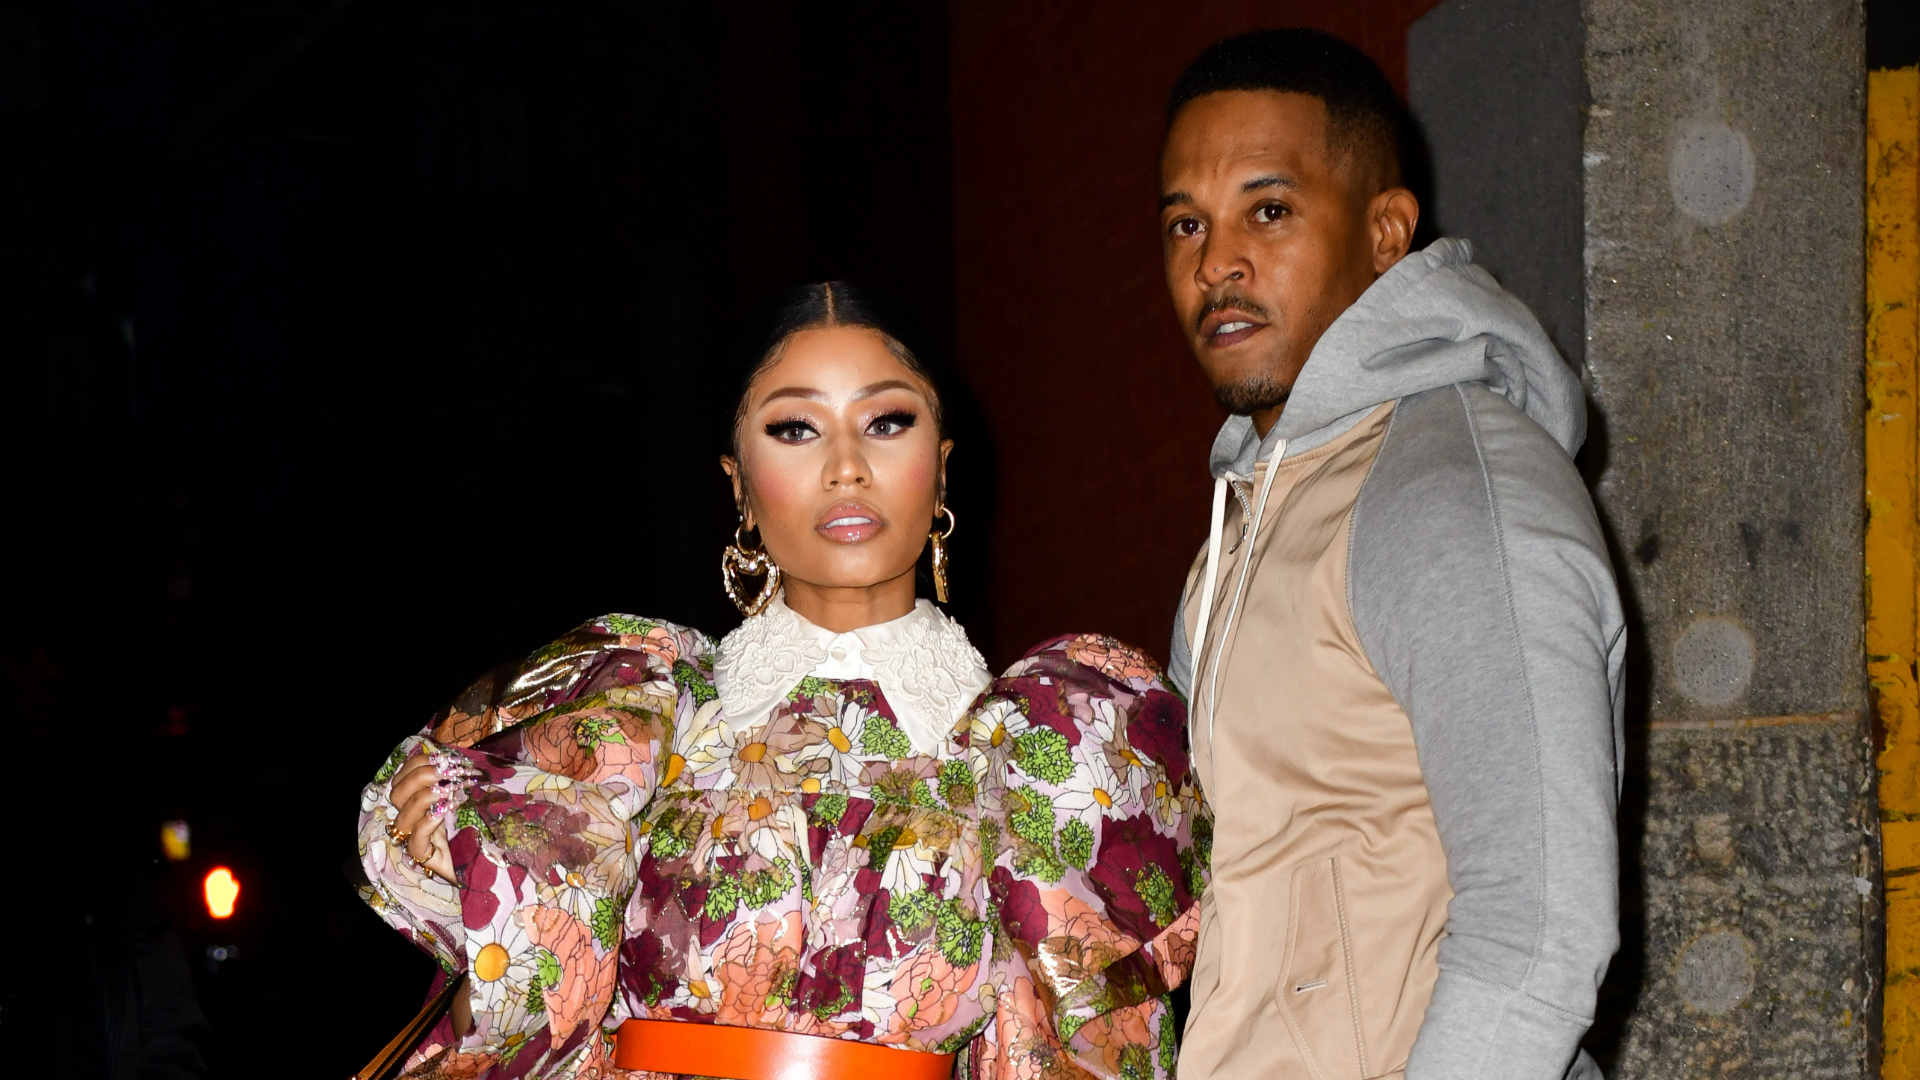 Nicki Minaj's Husband, Kenneth Petty, Can Now Use The Internet After Not  Registering As Sex Offender - theJasmineBRAND